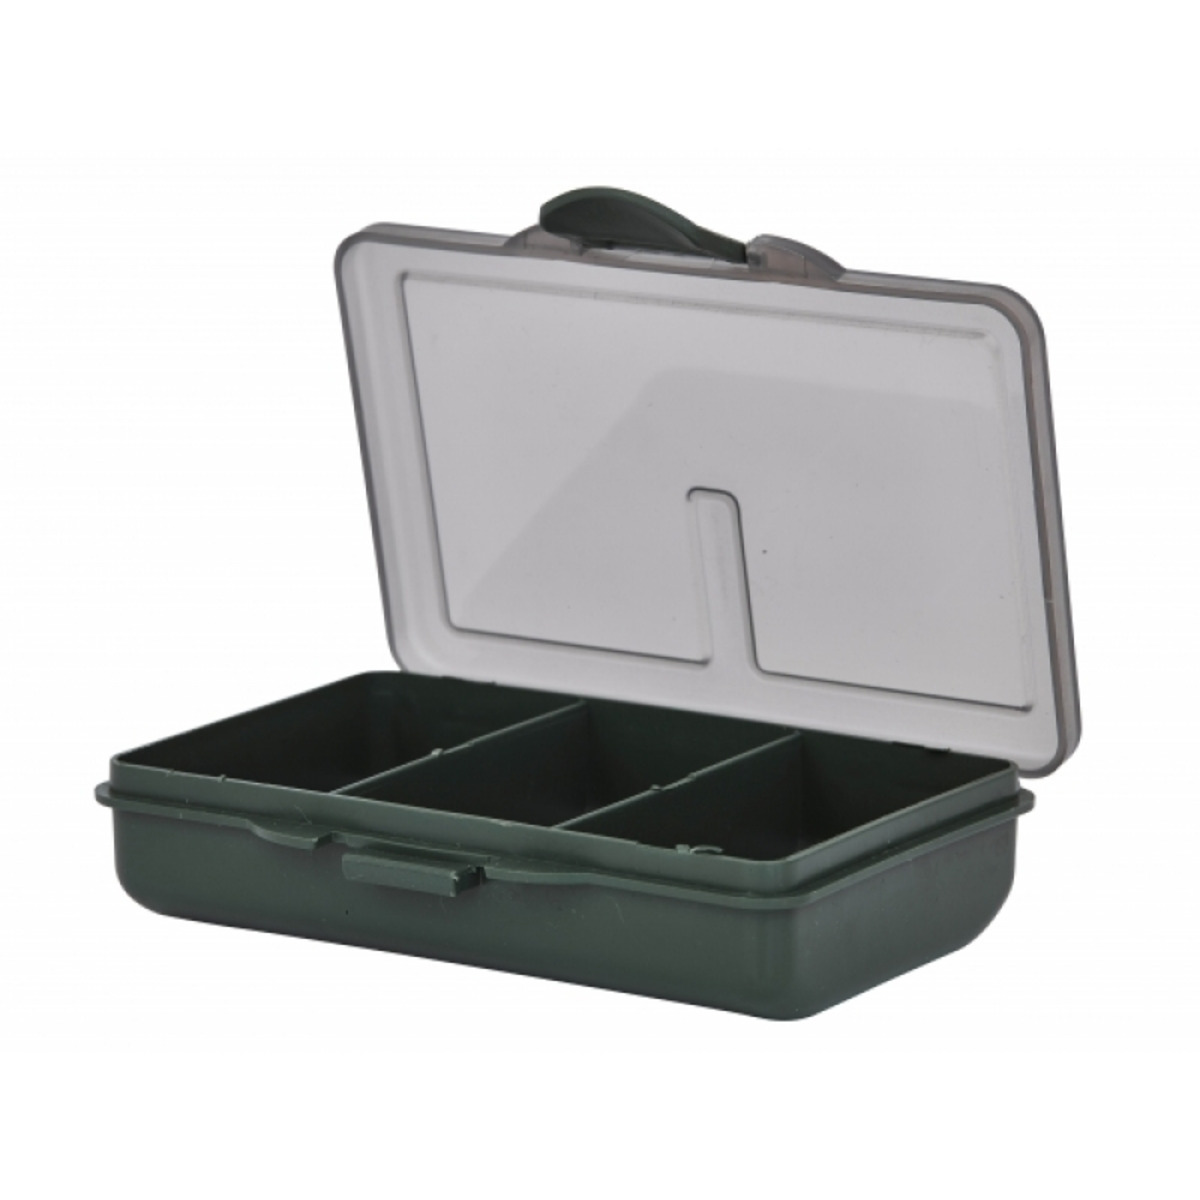 Starbaits Session Small Box - 3 Compartments         